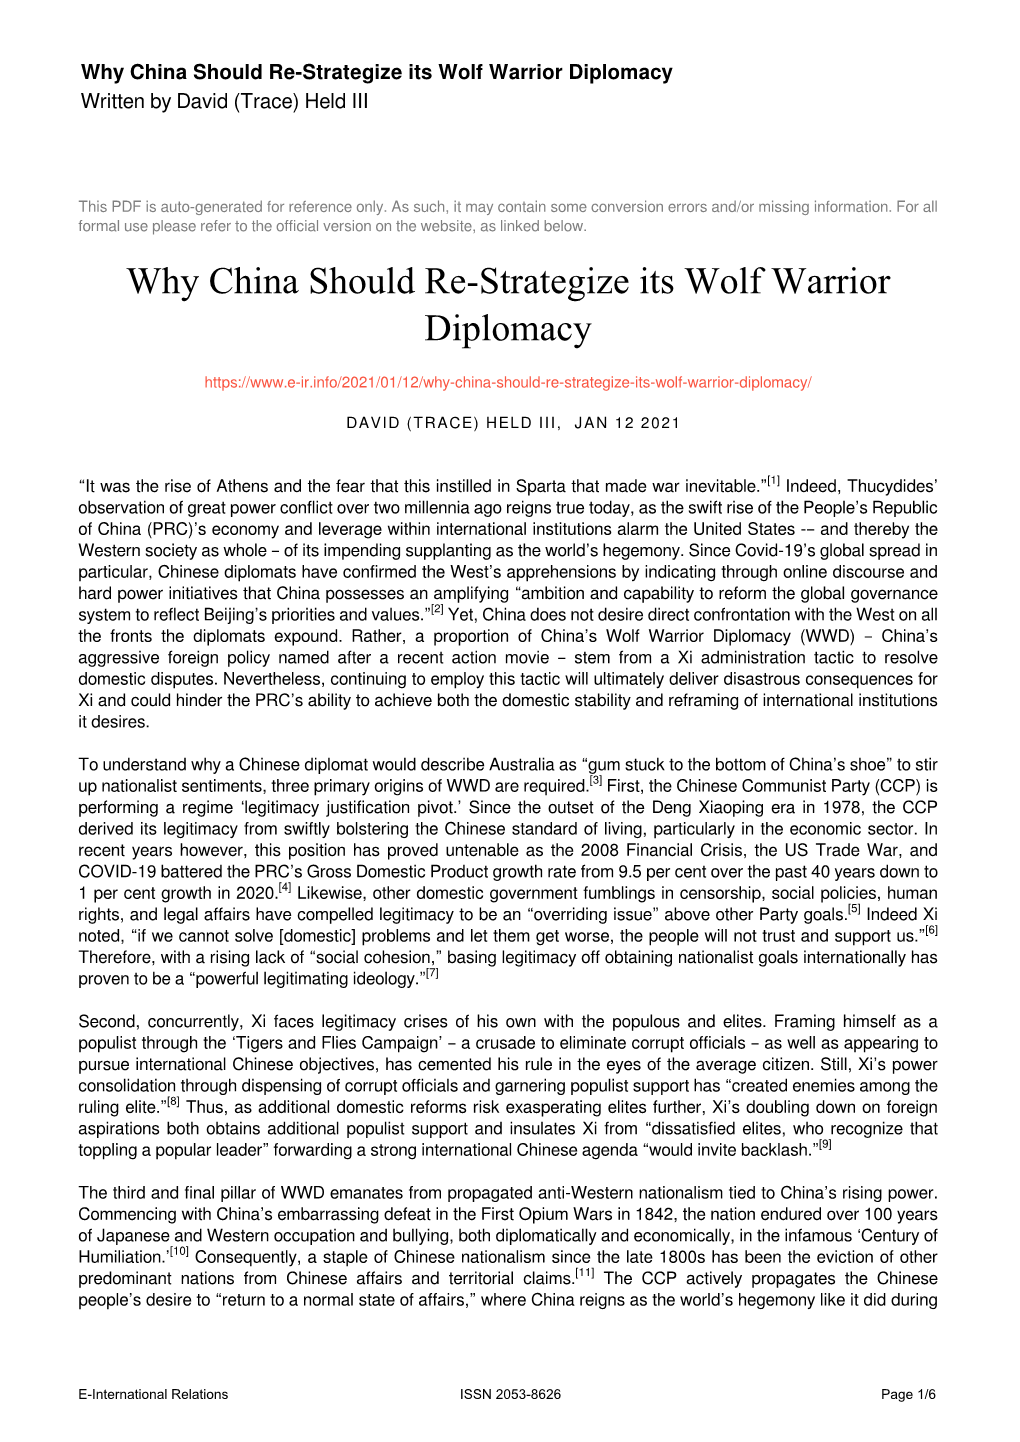 Why China Should Re-Strategize Its Wolf Warrior Diplomacy Written by David (Trace) Held III